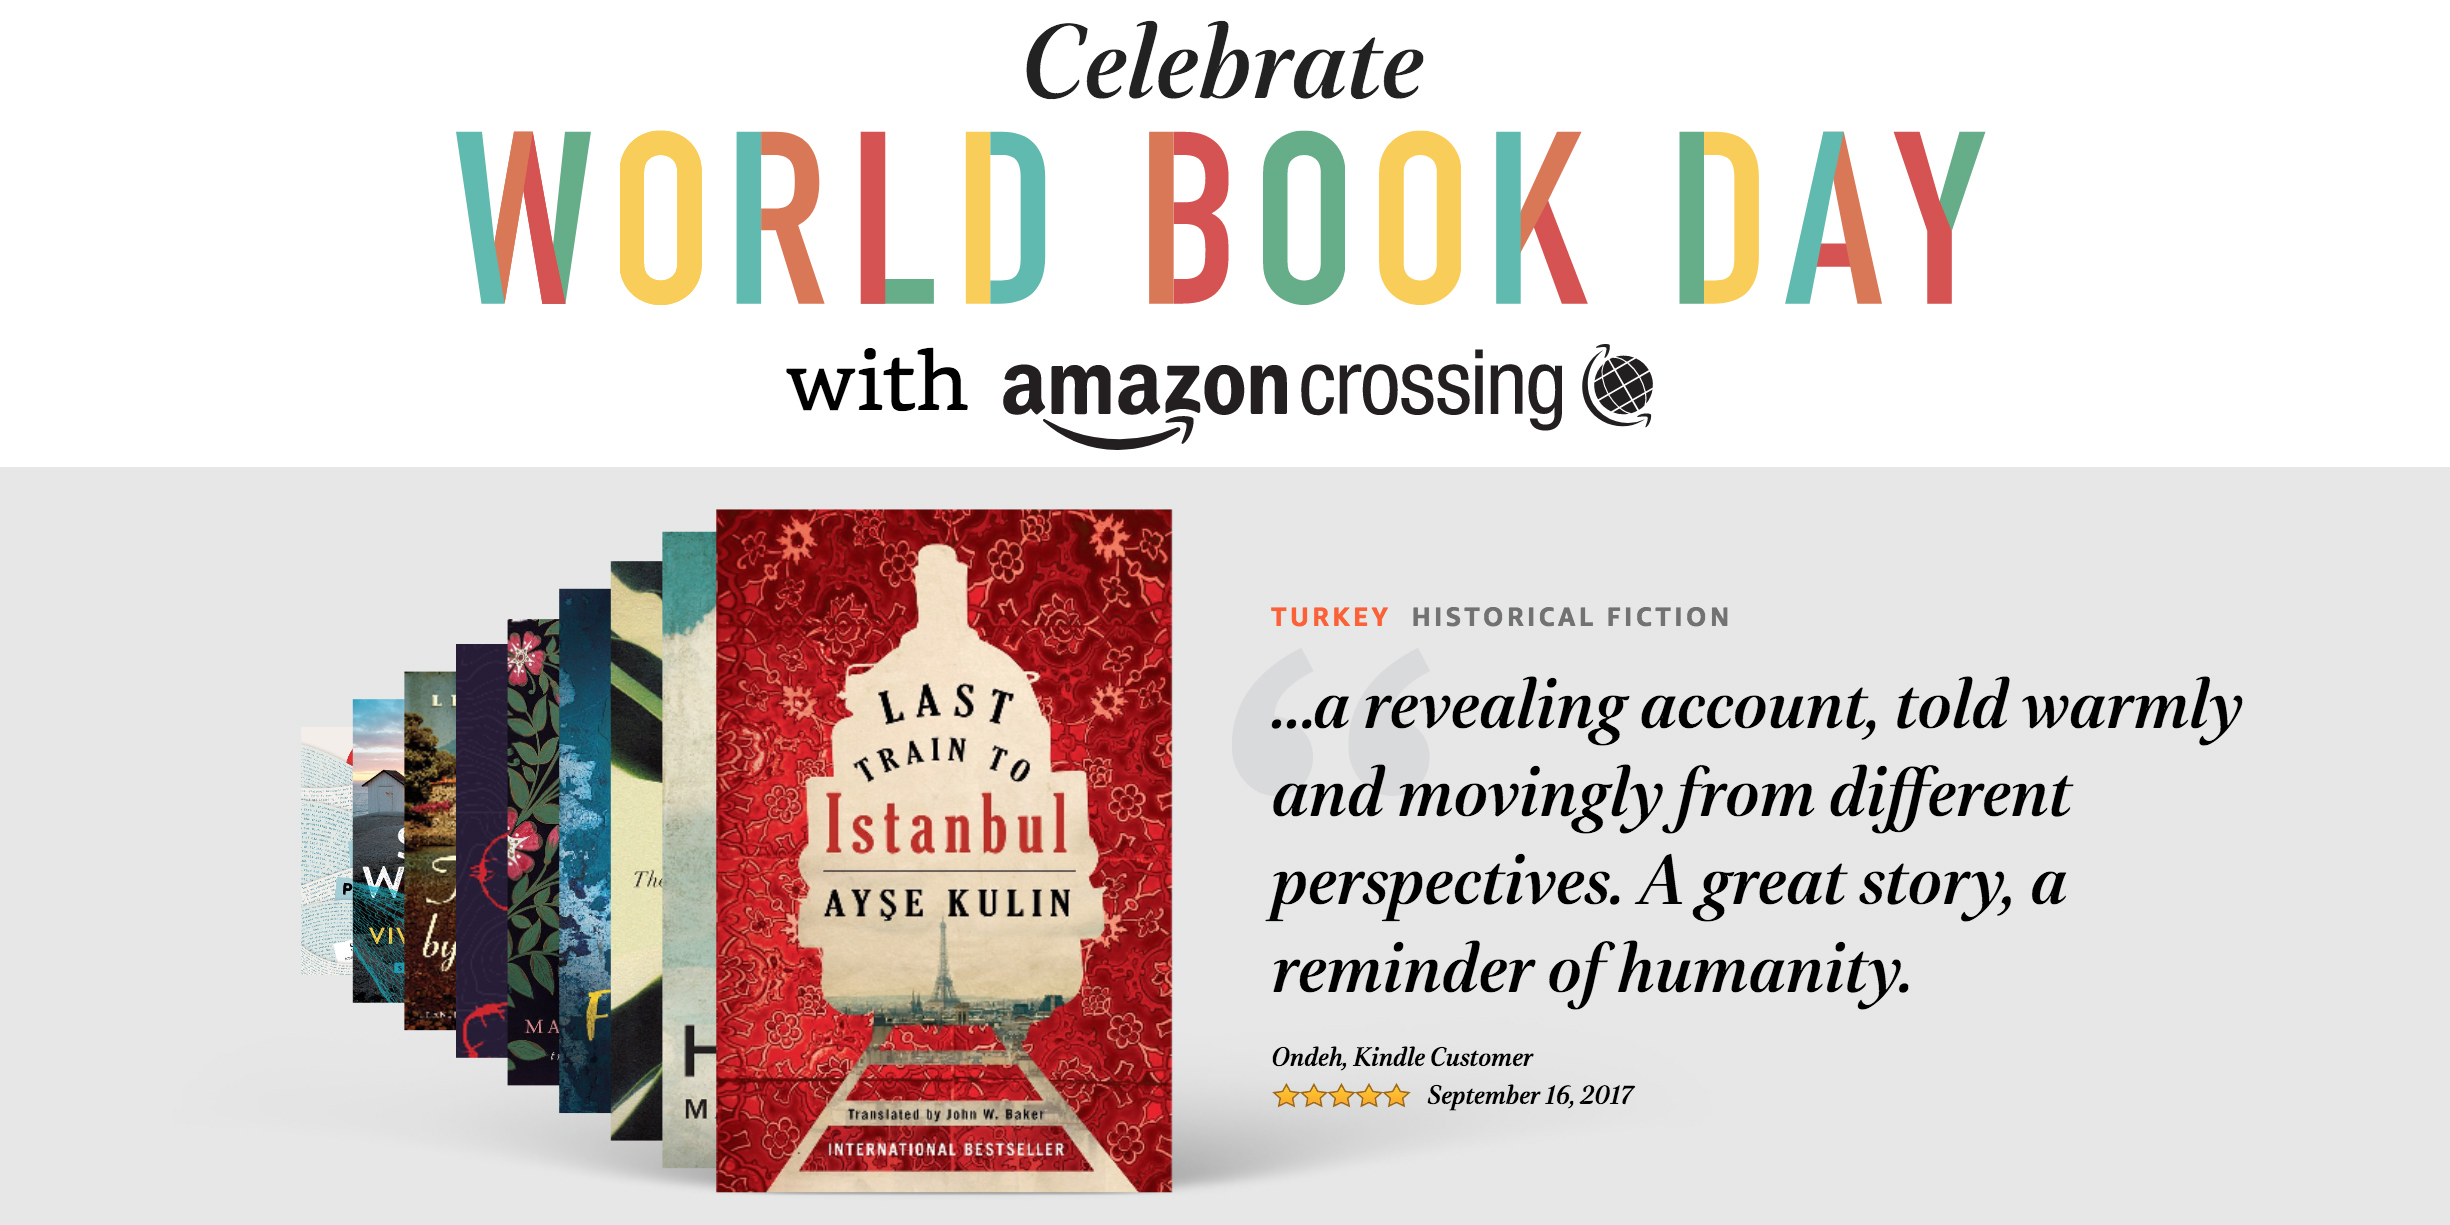 Amazon celebrates World Book Day with a selection of free Kindle eBooks